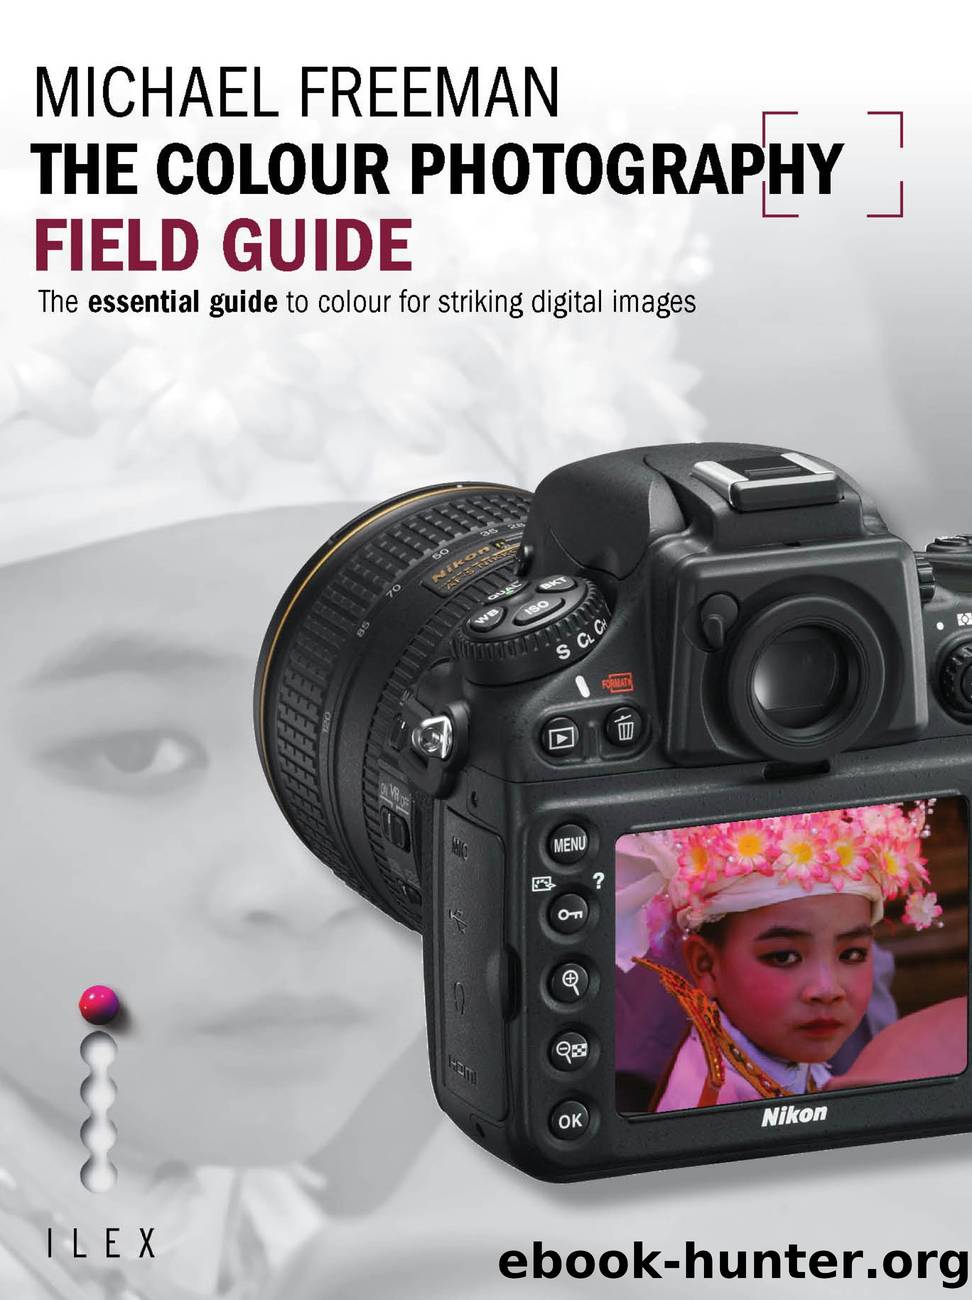 The Colour Photography Field Guide by Author